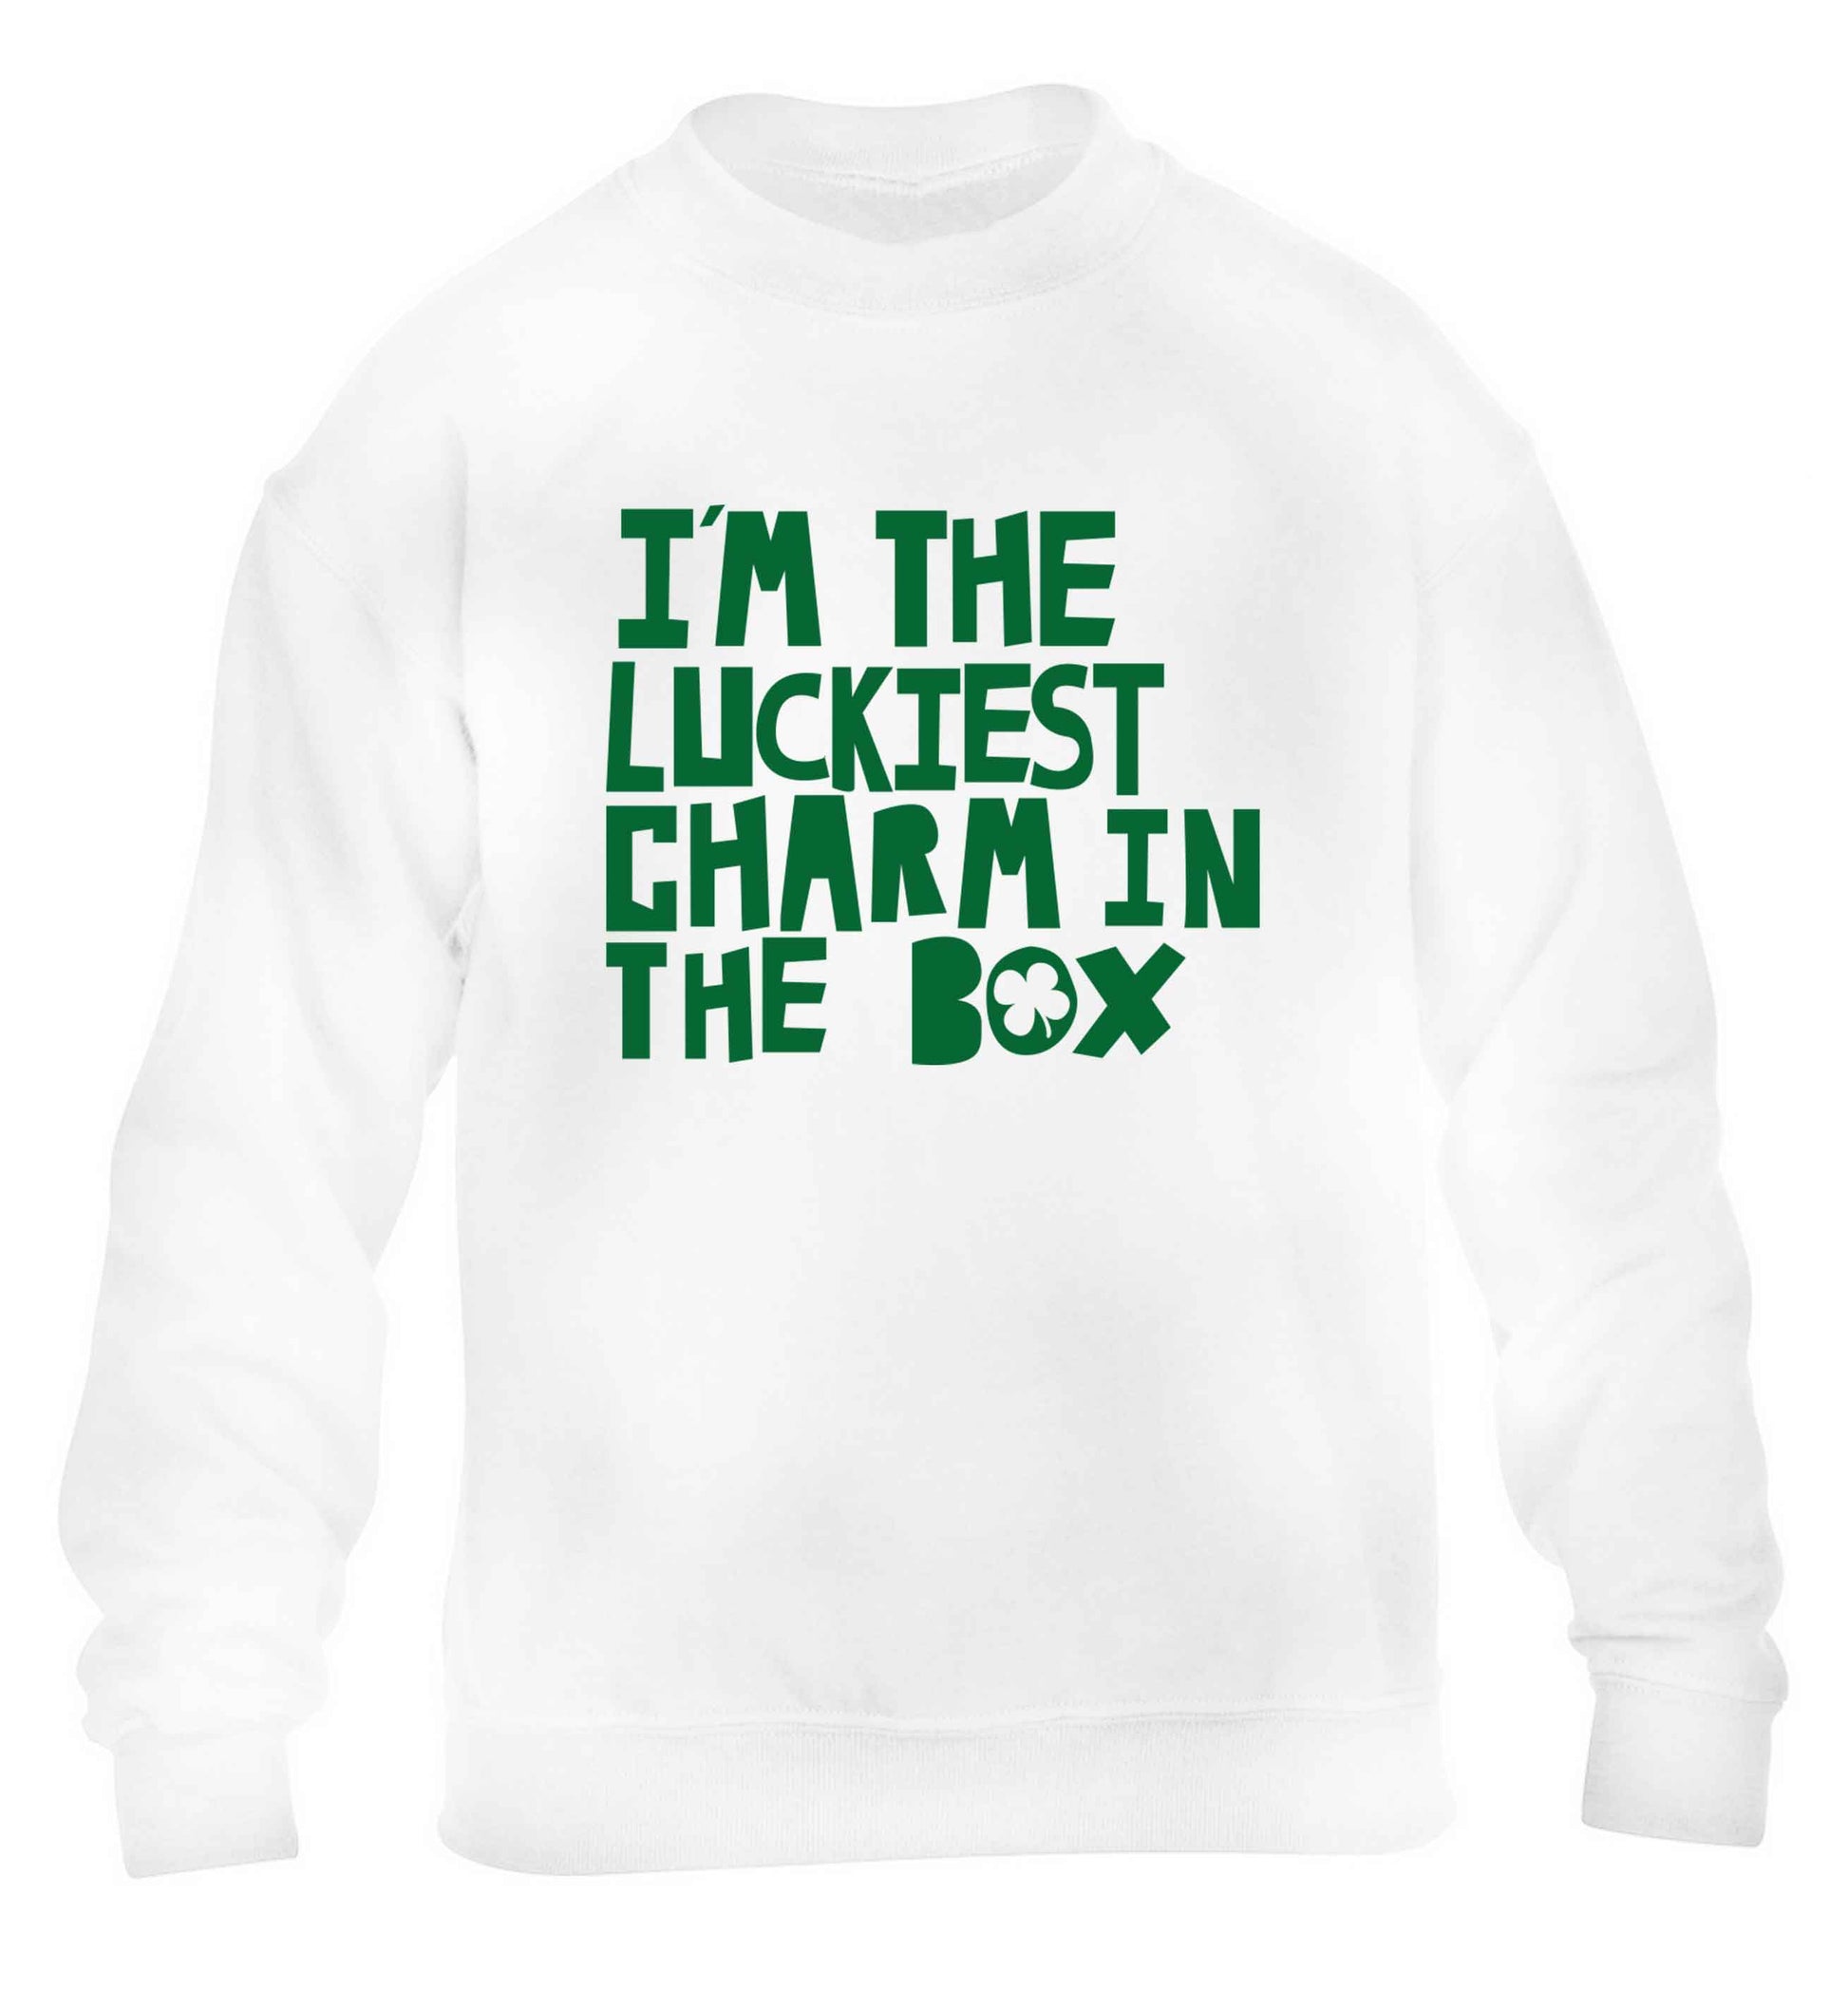 I'm the luckiest charm in the box children's white sweater 12-13 Years